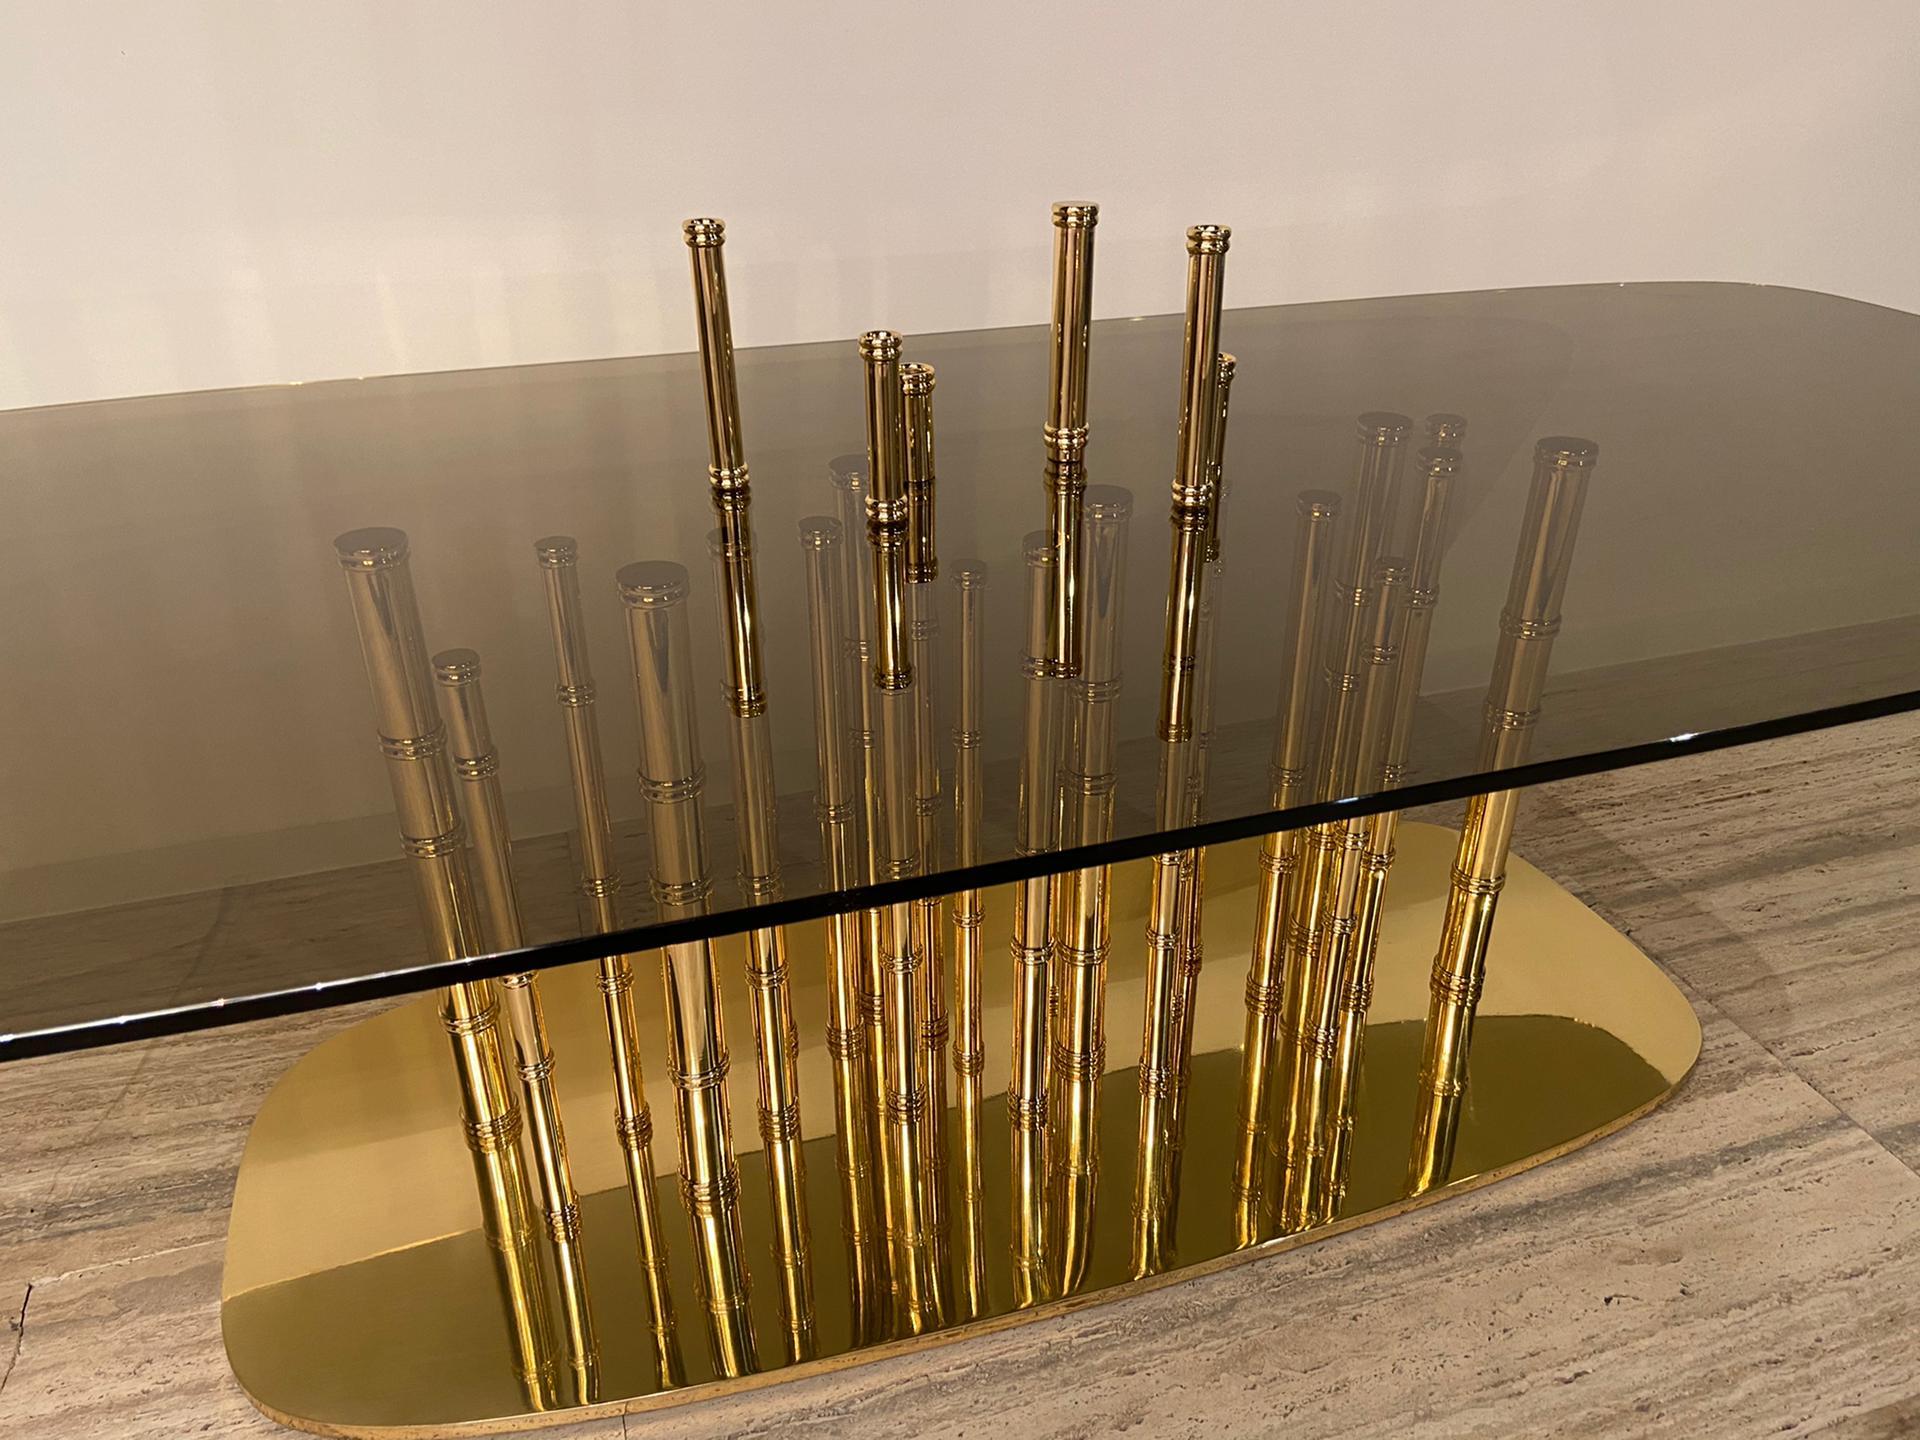 The Luxury gold plated bamboo glass coffee table offers unmistakable handcrafted style and glamour. Ultimately modern, this gorgeous design has it all. Providing a striking focus, a statement of superb quality. This sophisticated table exudes the